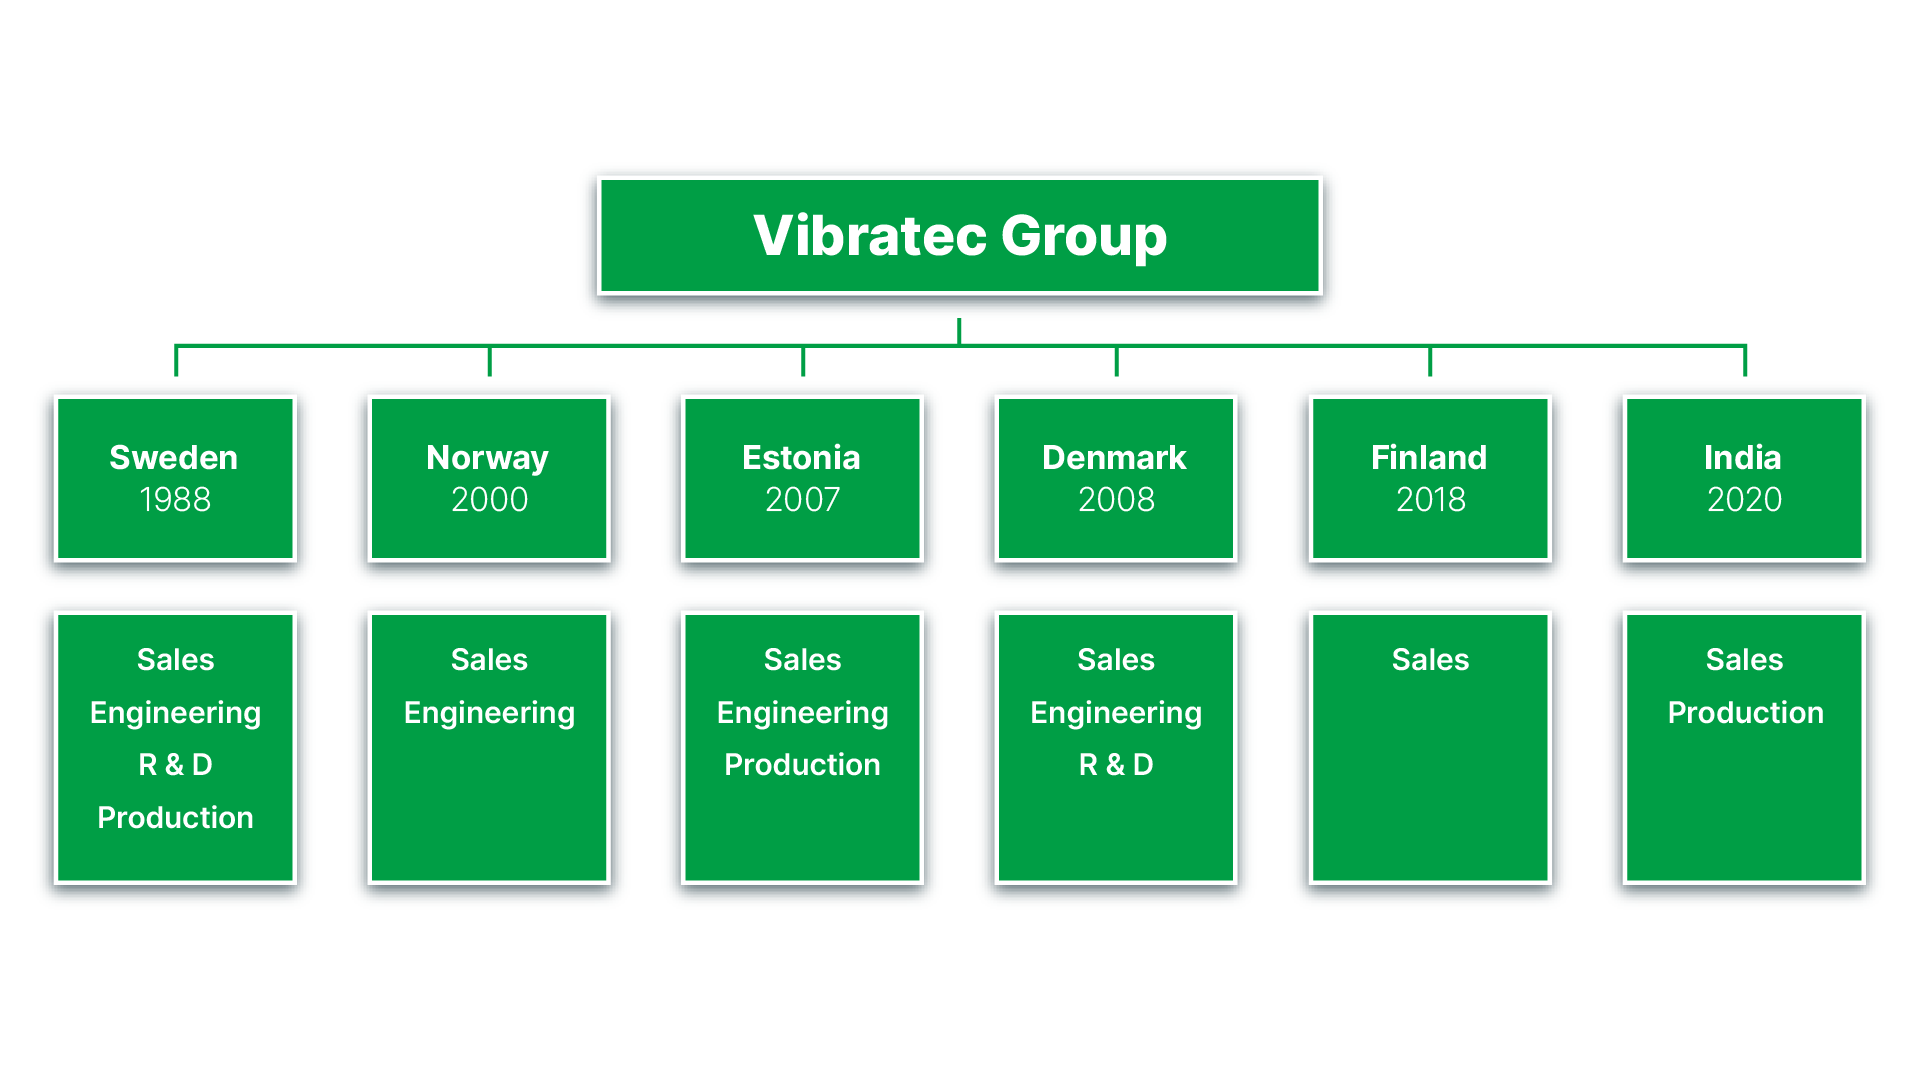 A picture of the Vibratec company organisation